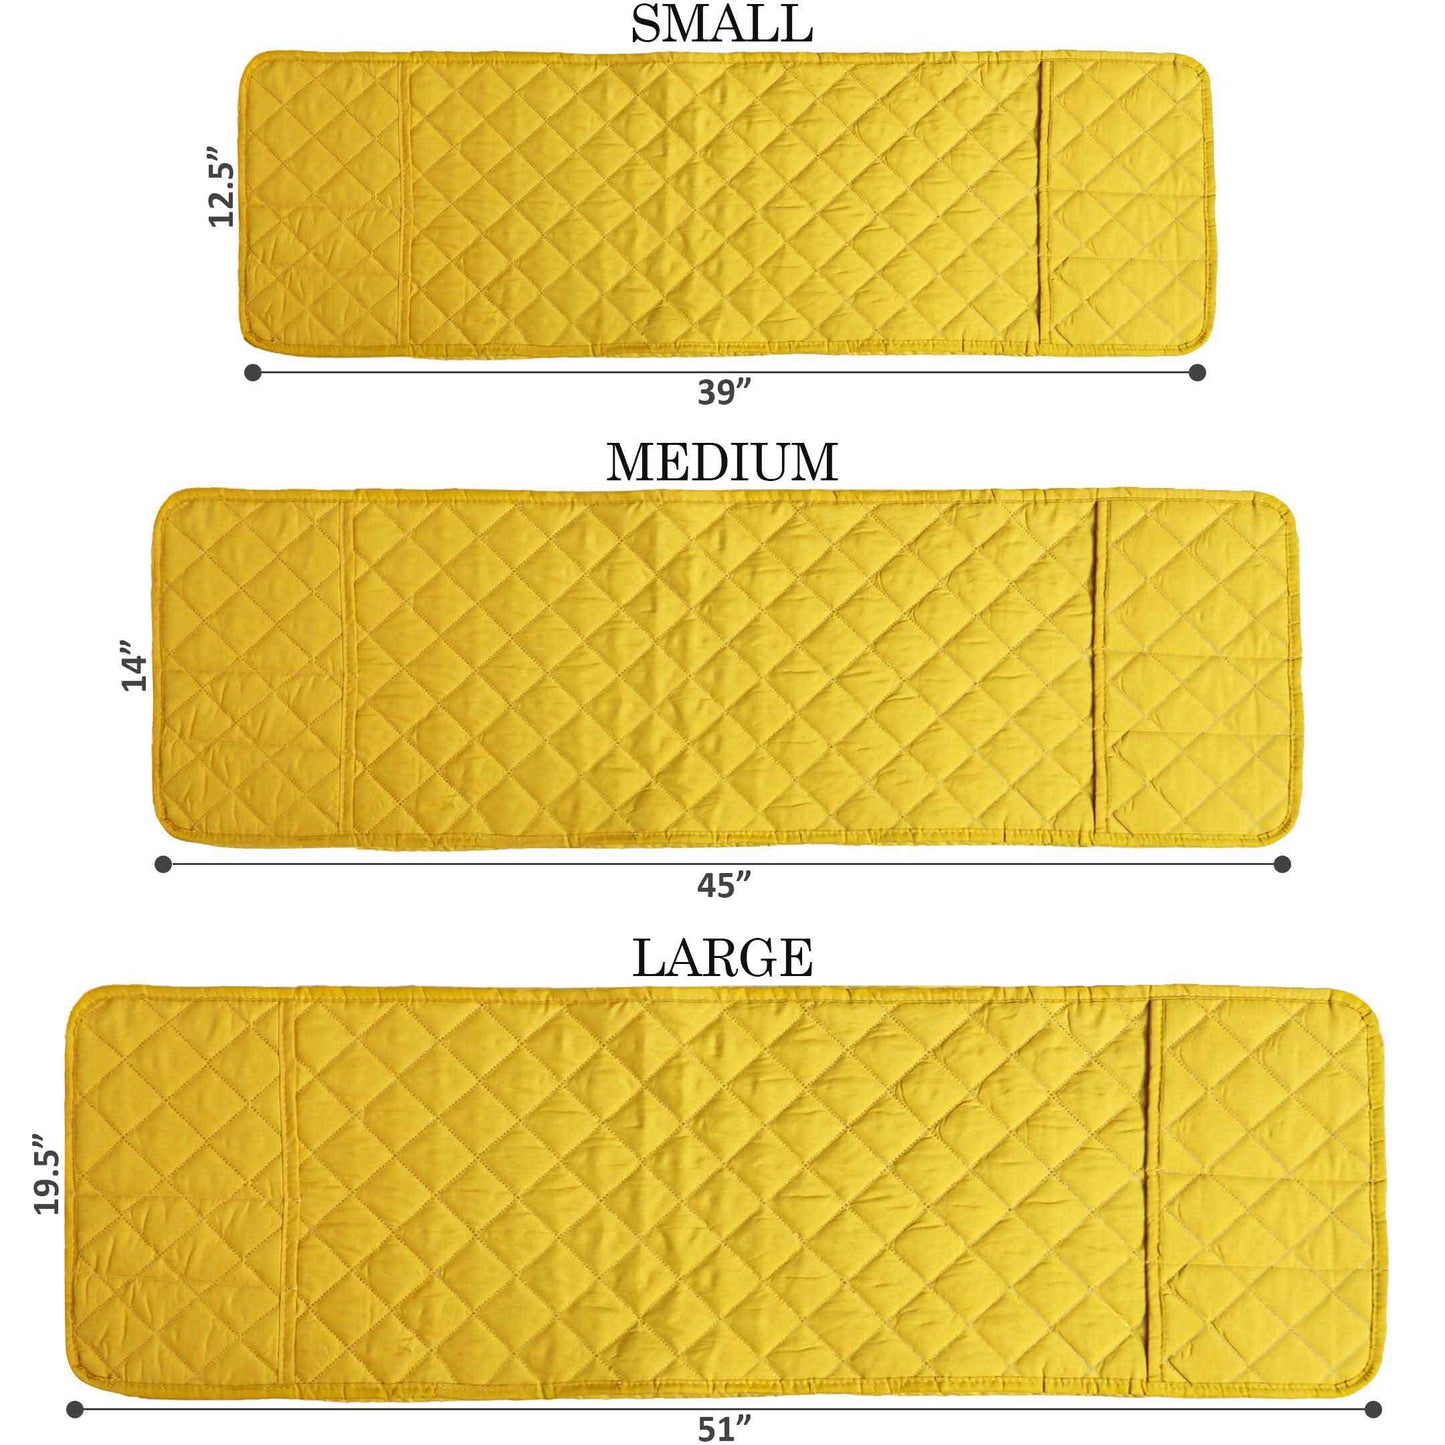 Waterproof Quilted Microwave Oven Cover Beige Skin Yellow